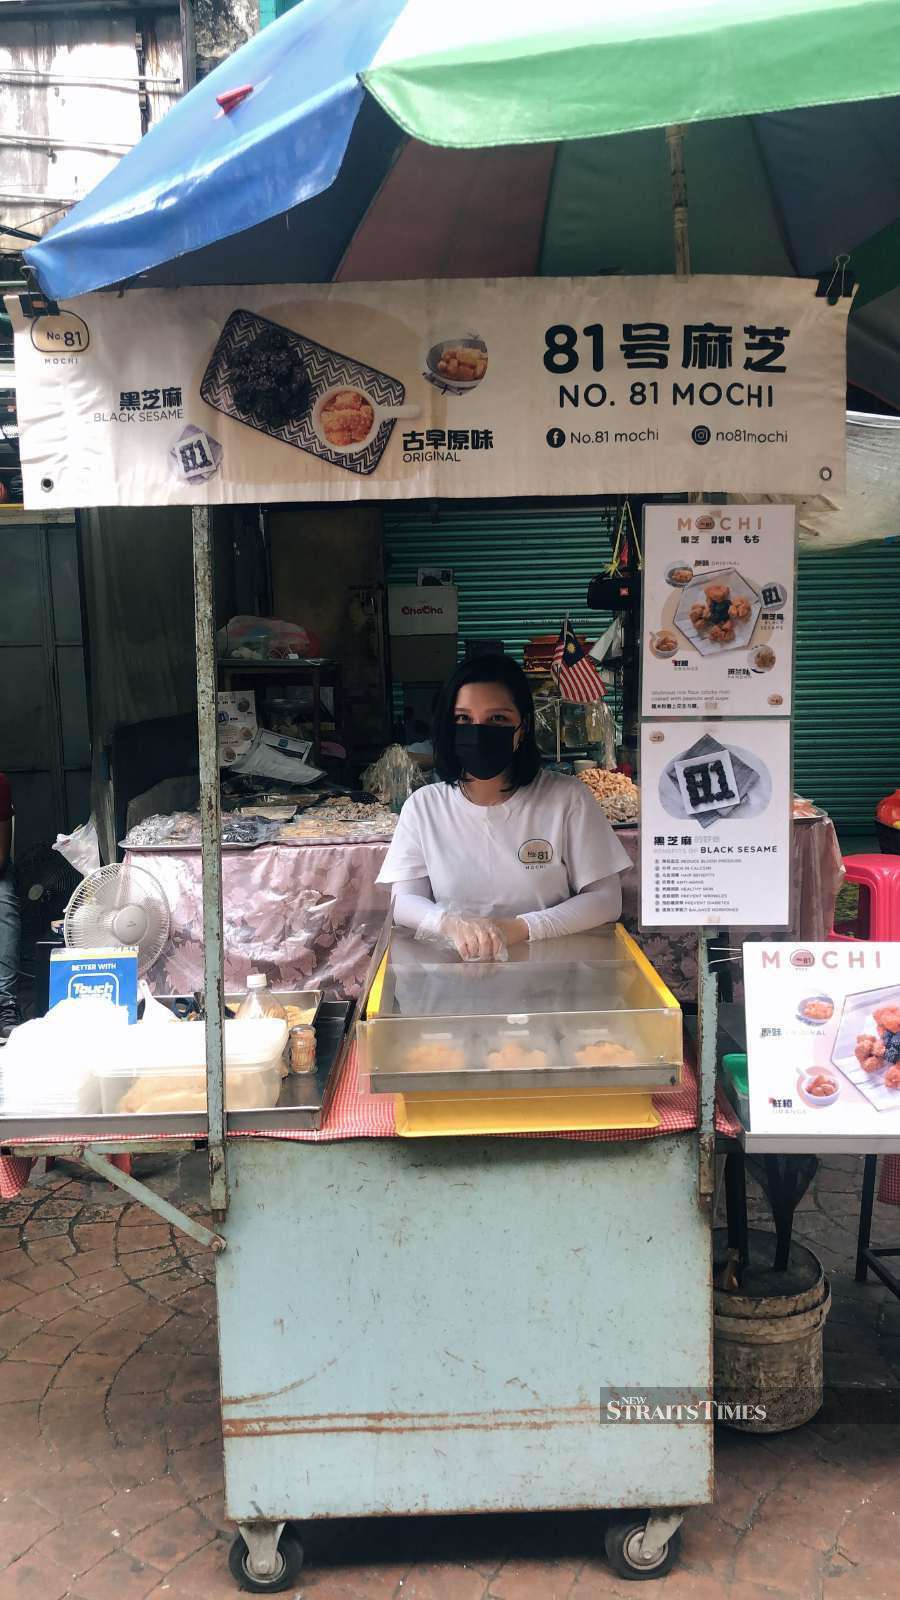 The pandemic will not deter No. 81 Mochi from serving up their 